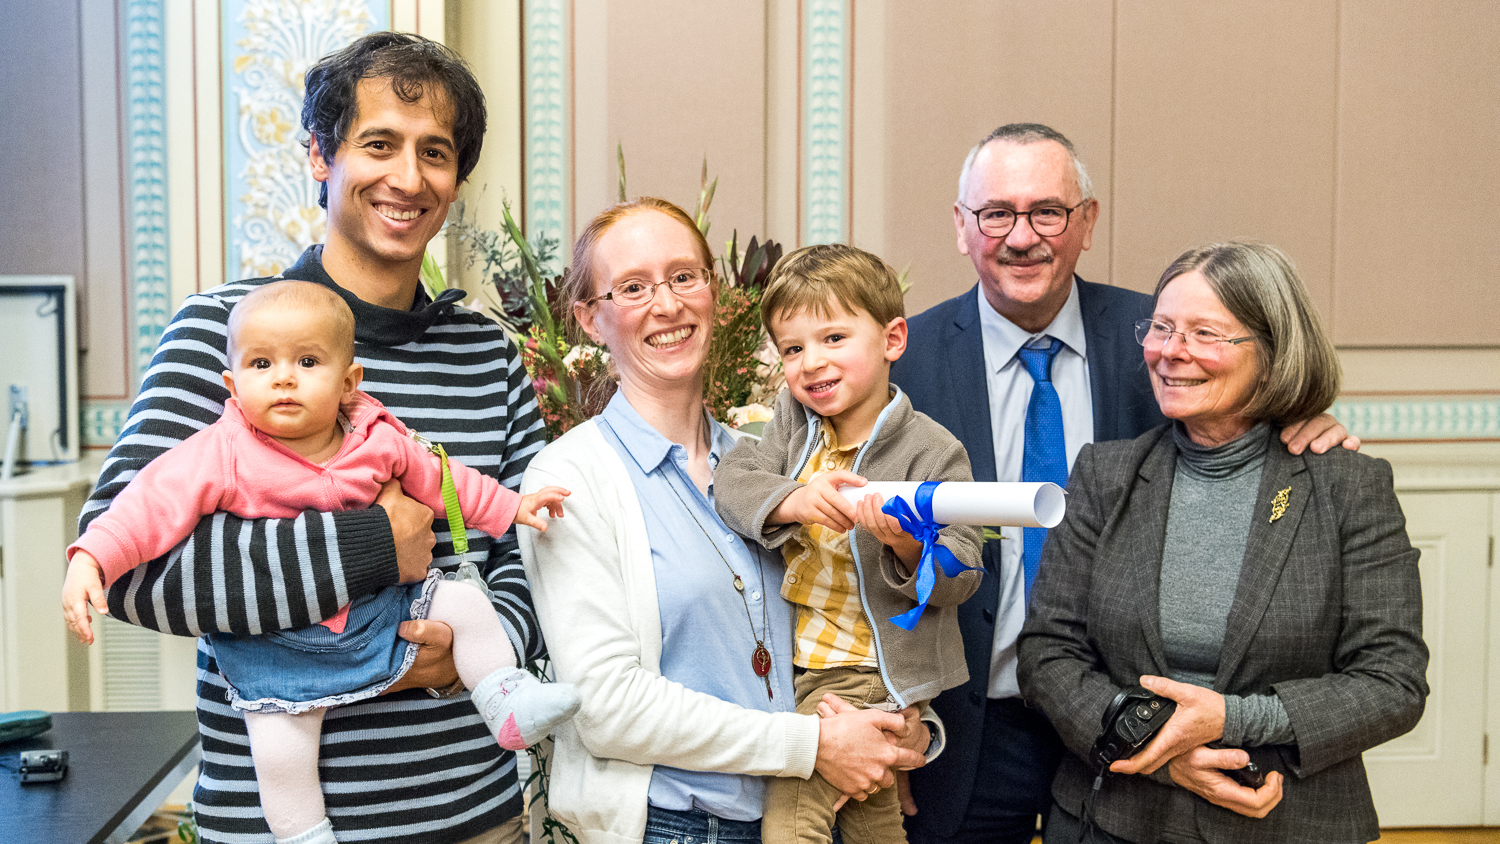 The Marie Heim-Vögtlin Prize was presented to UZH mathematician Mathilde Bouvel (center) at the anniversary event honoring Nadezhda Suslova. Also in the picture: Bouvel’s husband, children, and parents.